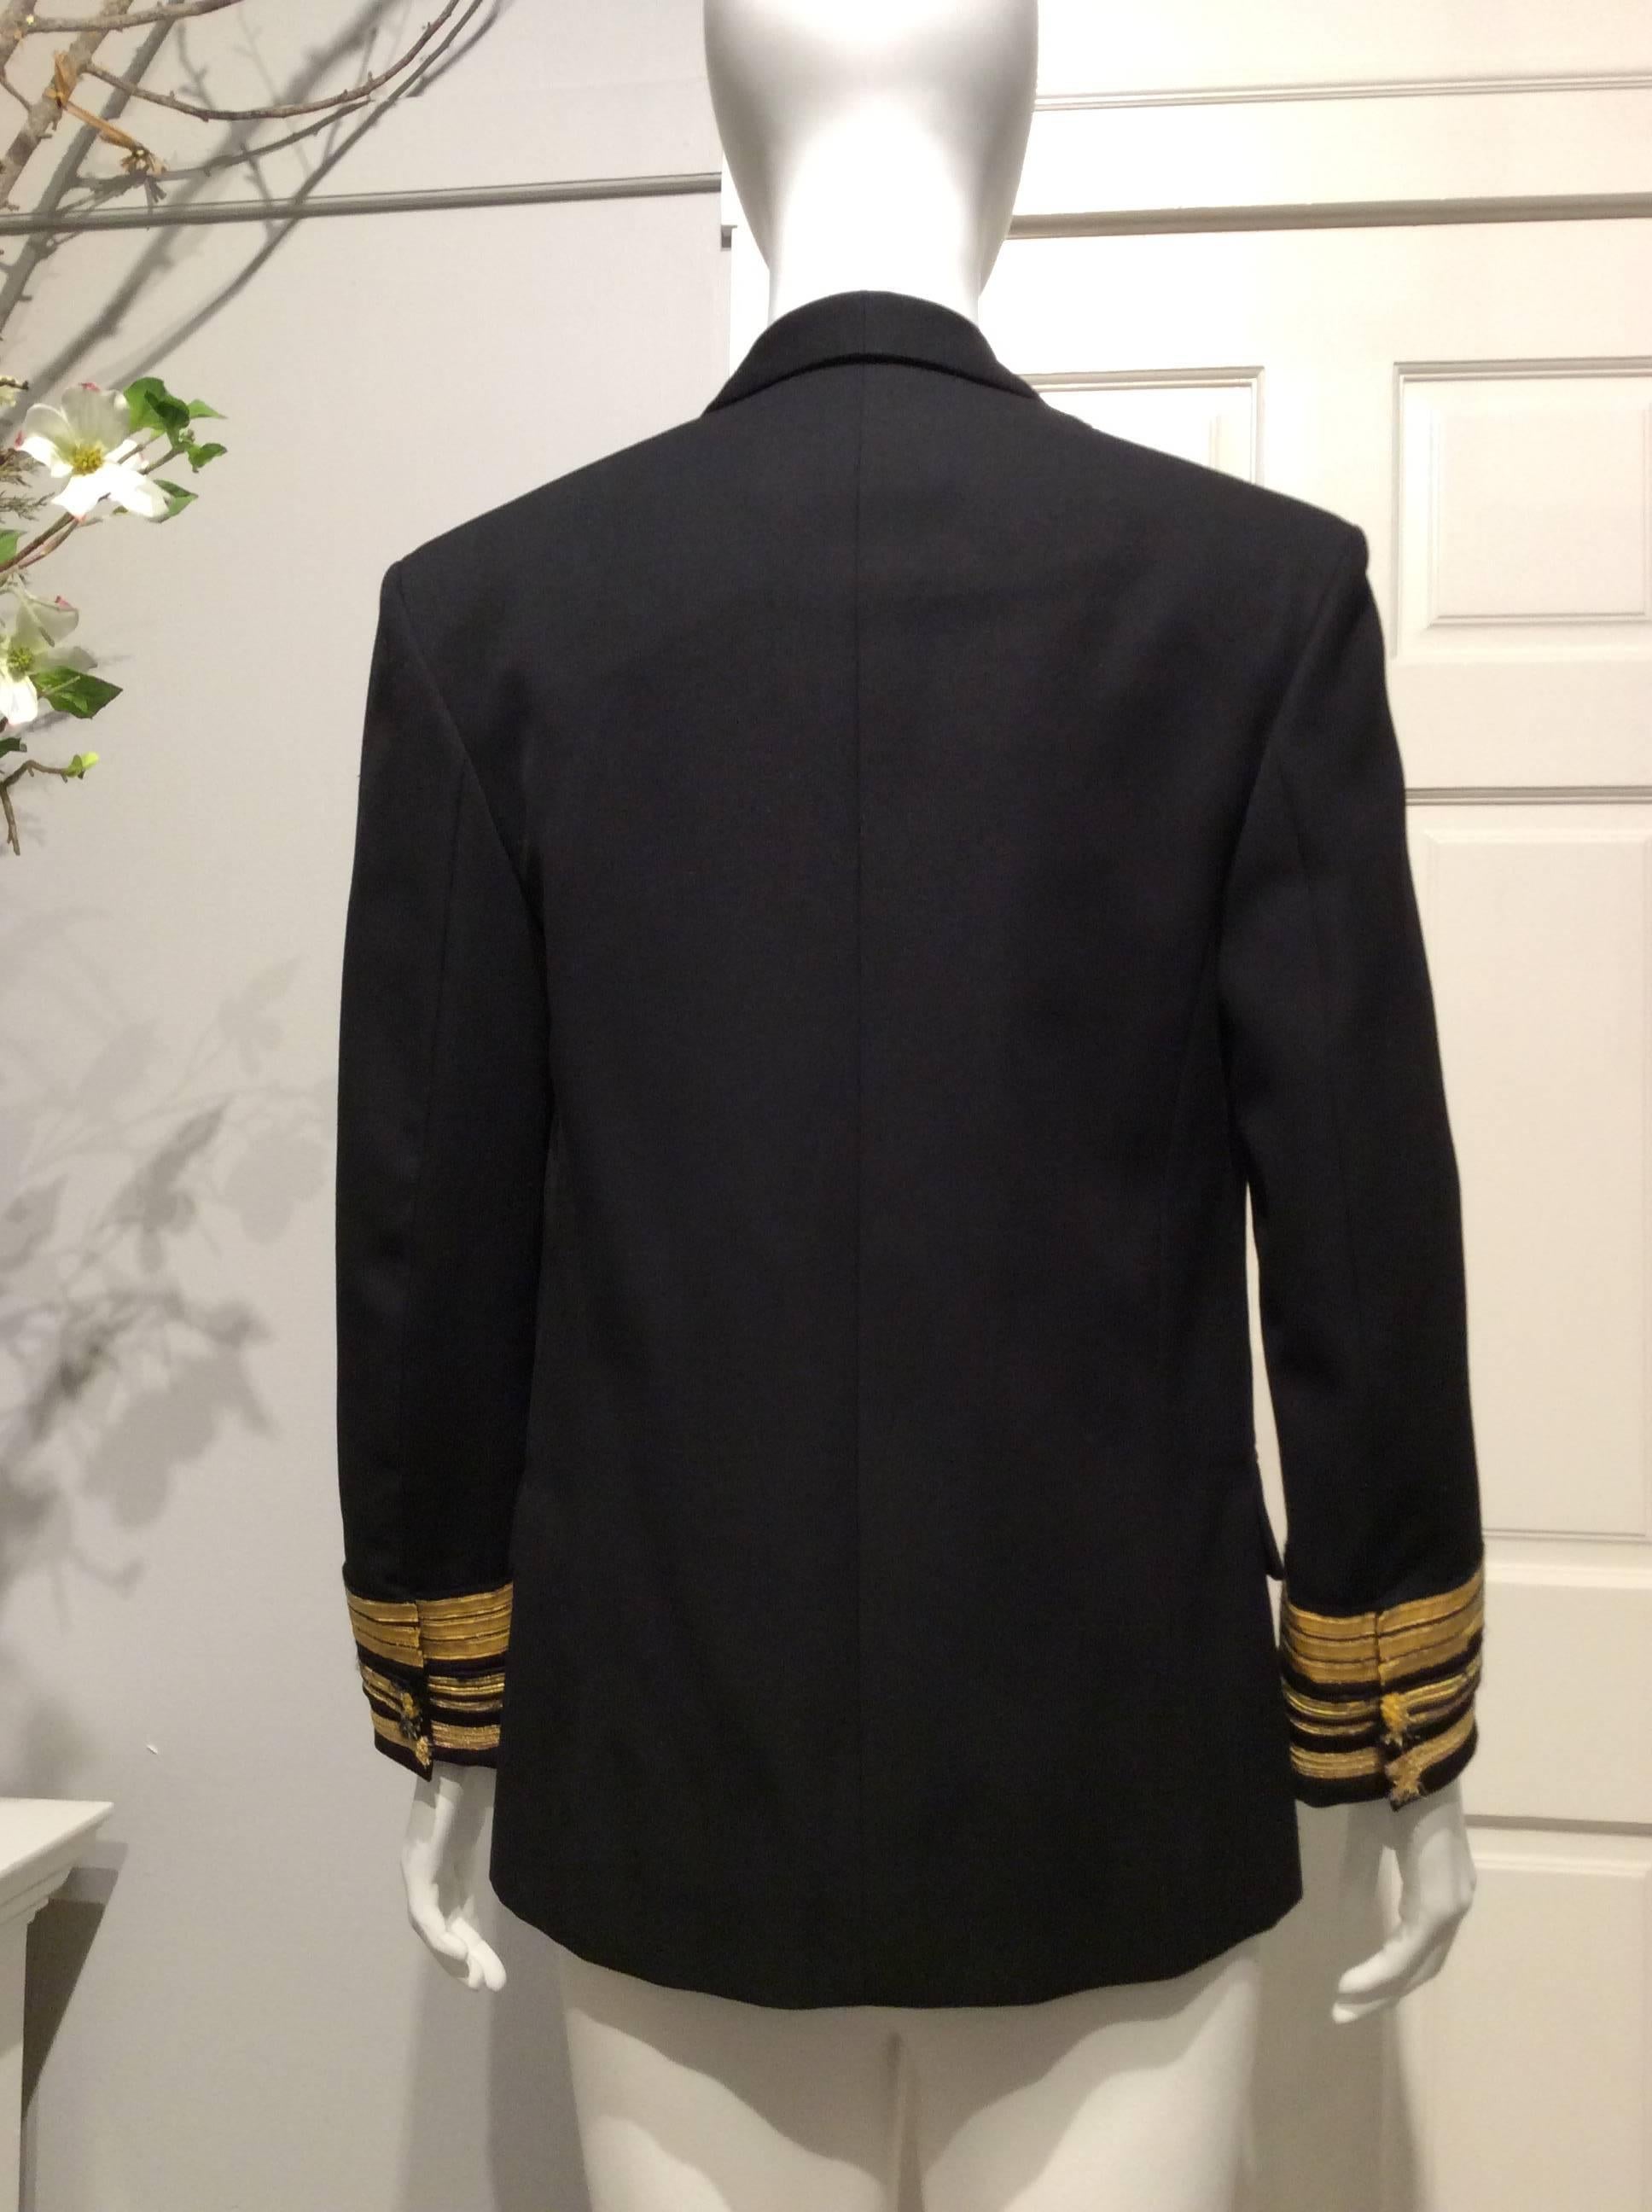 Black 100% wool gabardine Balmain uniform inspired jacket with unfinished gold ribbon trim on sleeves and crested pewter silver  buttons. Narrow tuxedo collar lapels. Mock double breasted - it closes with a small metal hook on the left side. Two